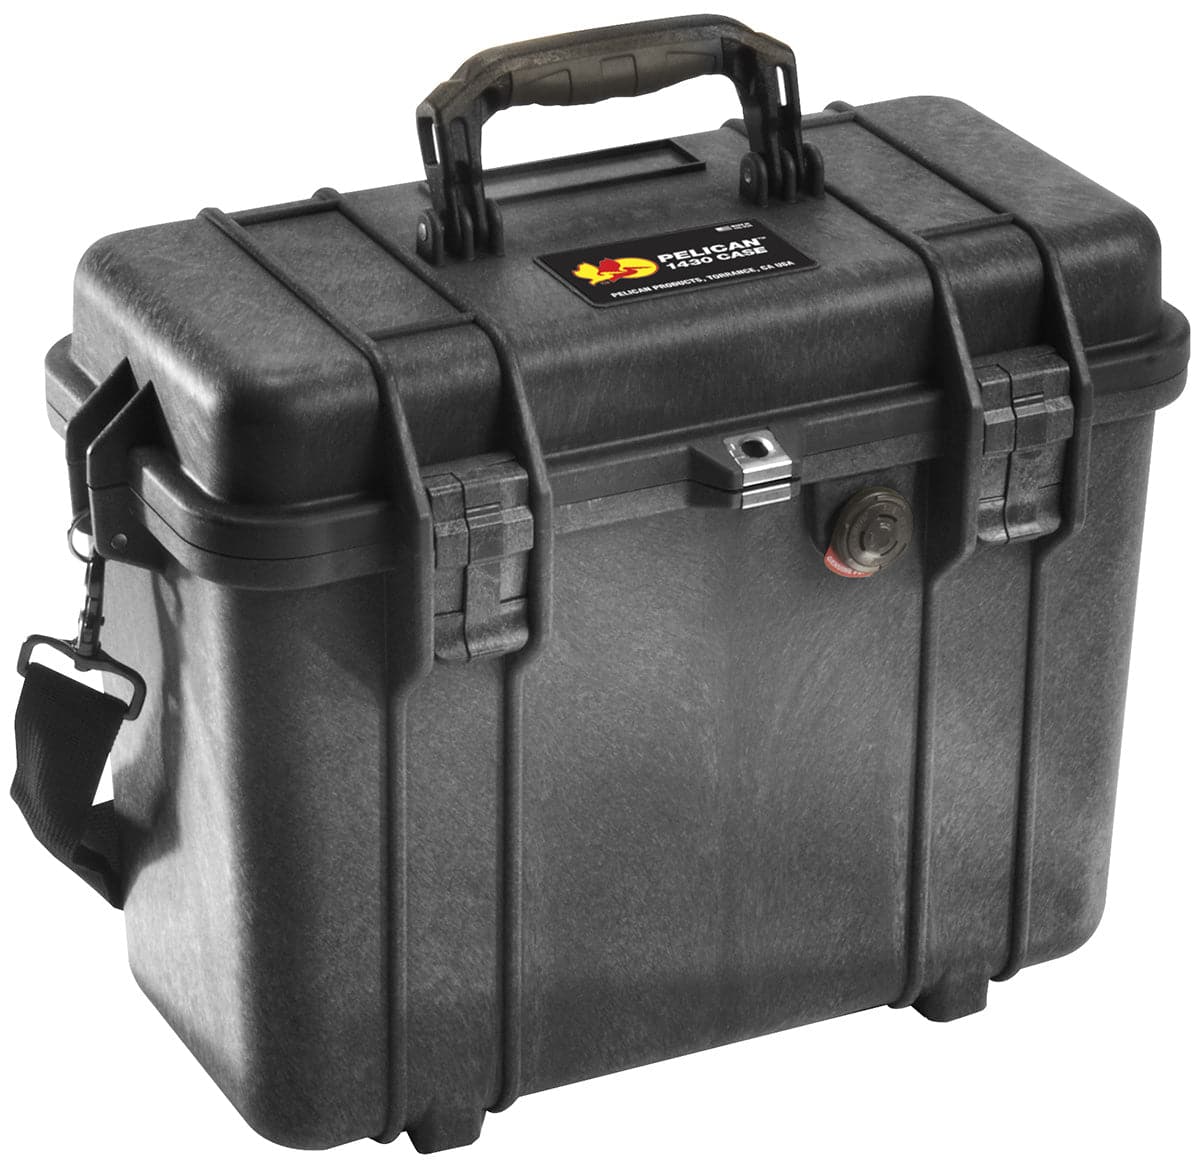 Featuring the 1430 Case dry box, pelican case manufactured by Pelican shown here from one angle.